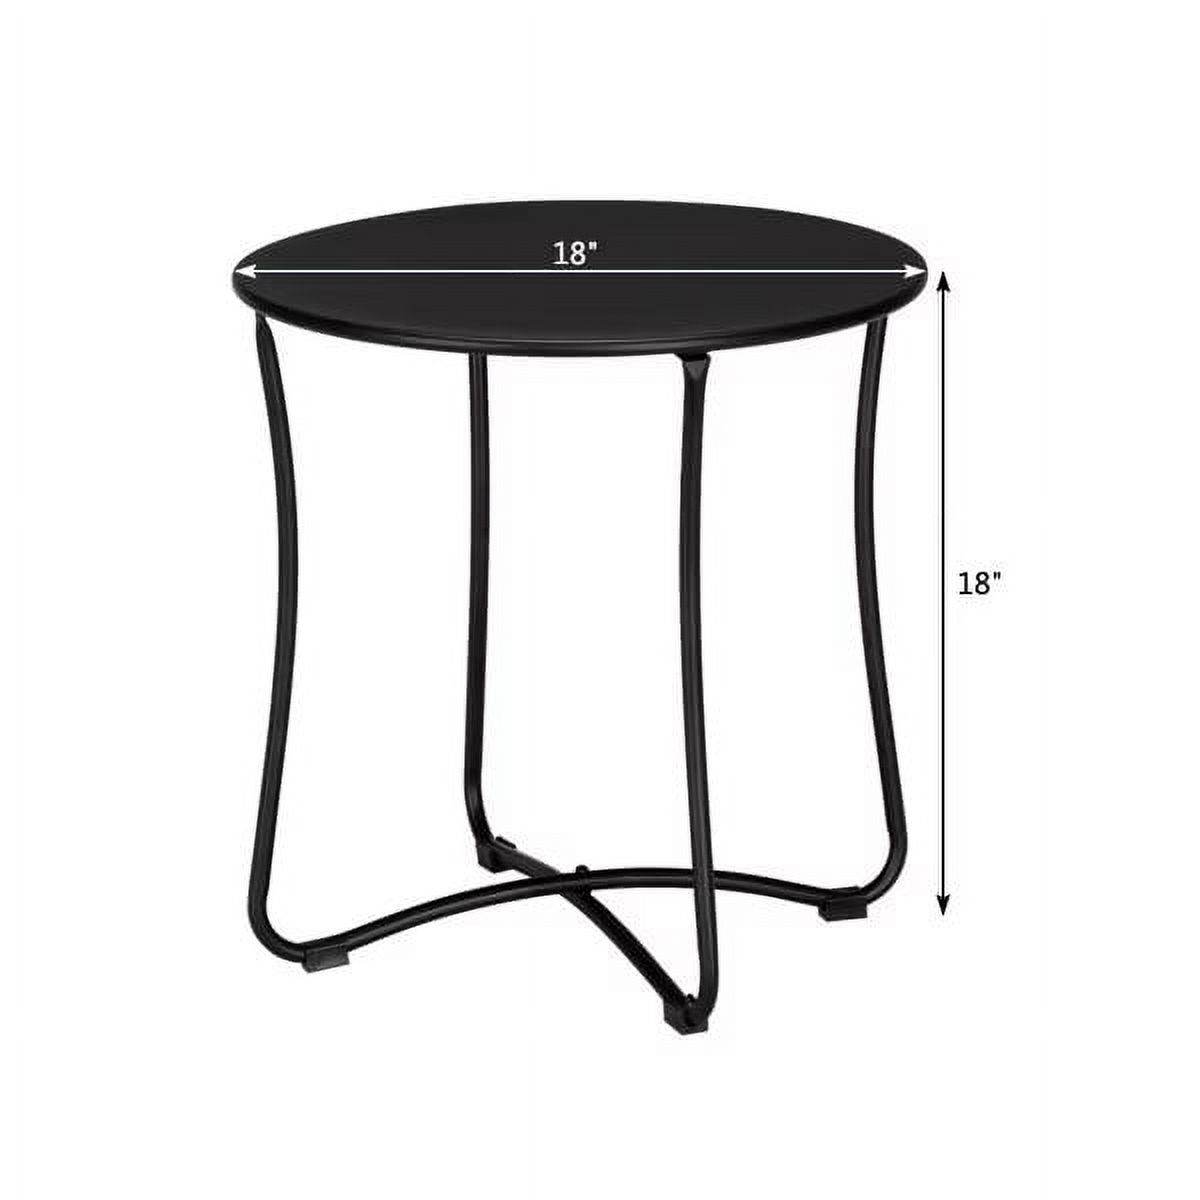 18" Patio Portable Side Table, Waterproof Round Metal Steel Side Table, Terrace Wrought Iron Side Table, Weather Resistant Portable Outdoor and Indoor End Table, for Garden Balcony Yard, Black - image 4 of 7